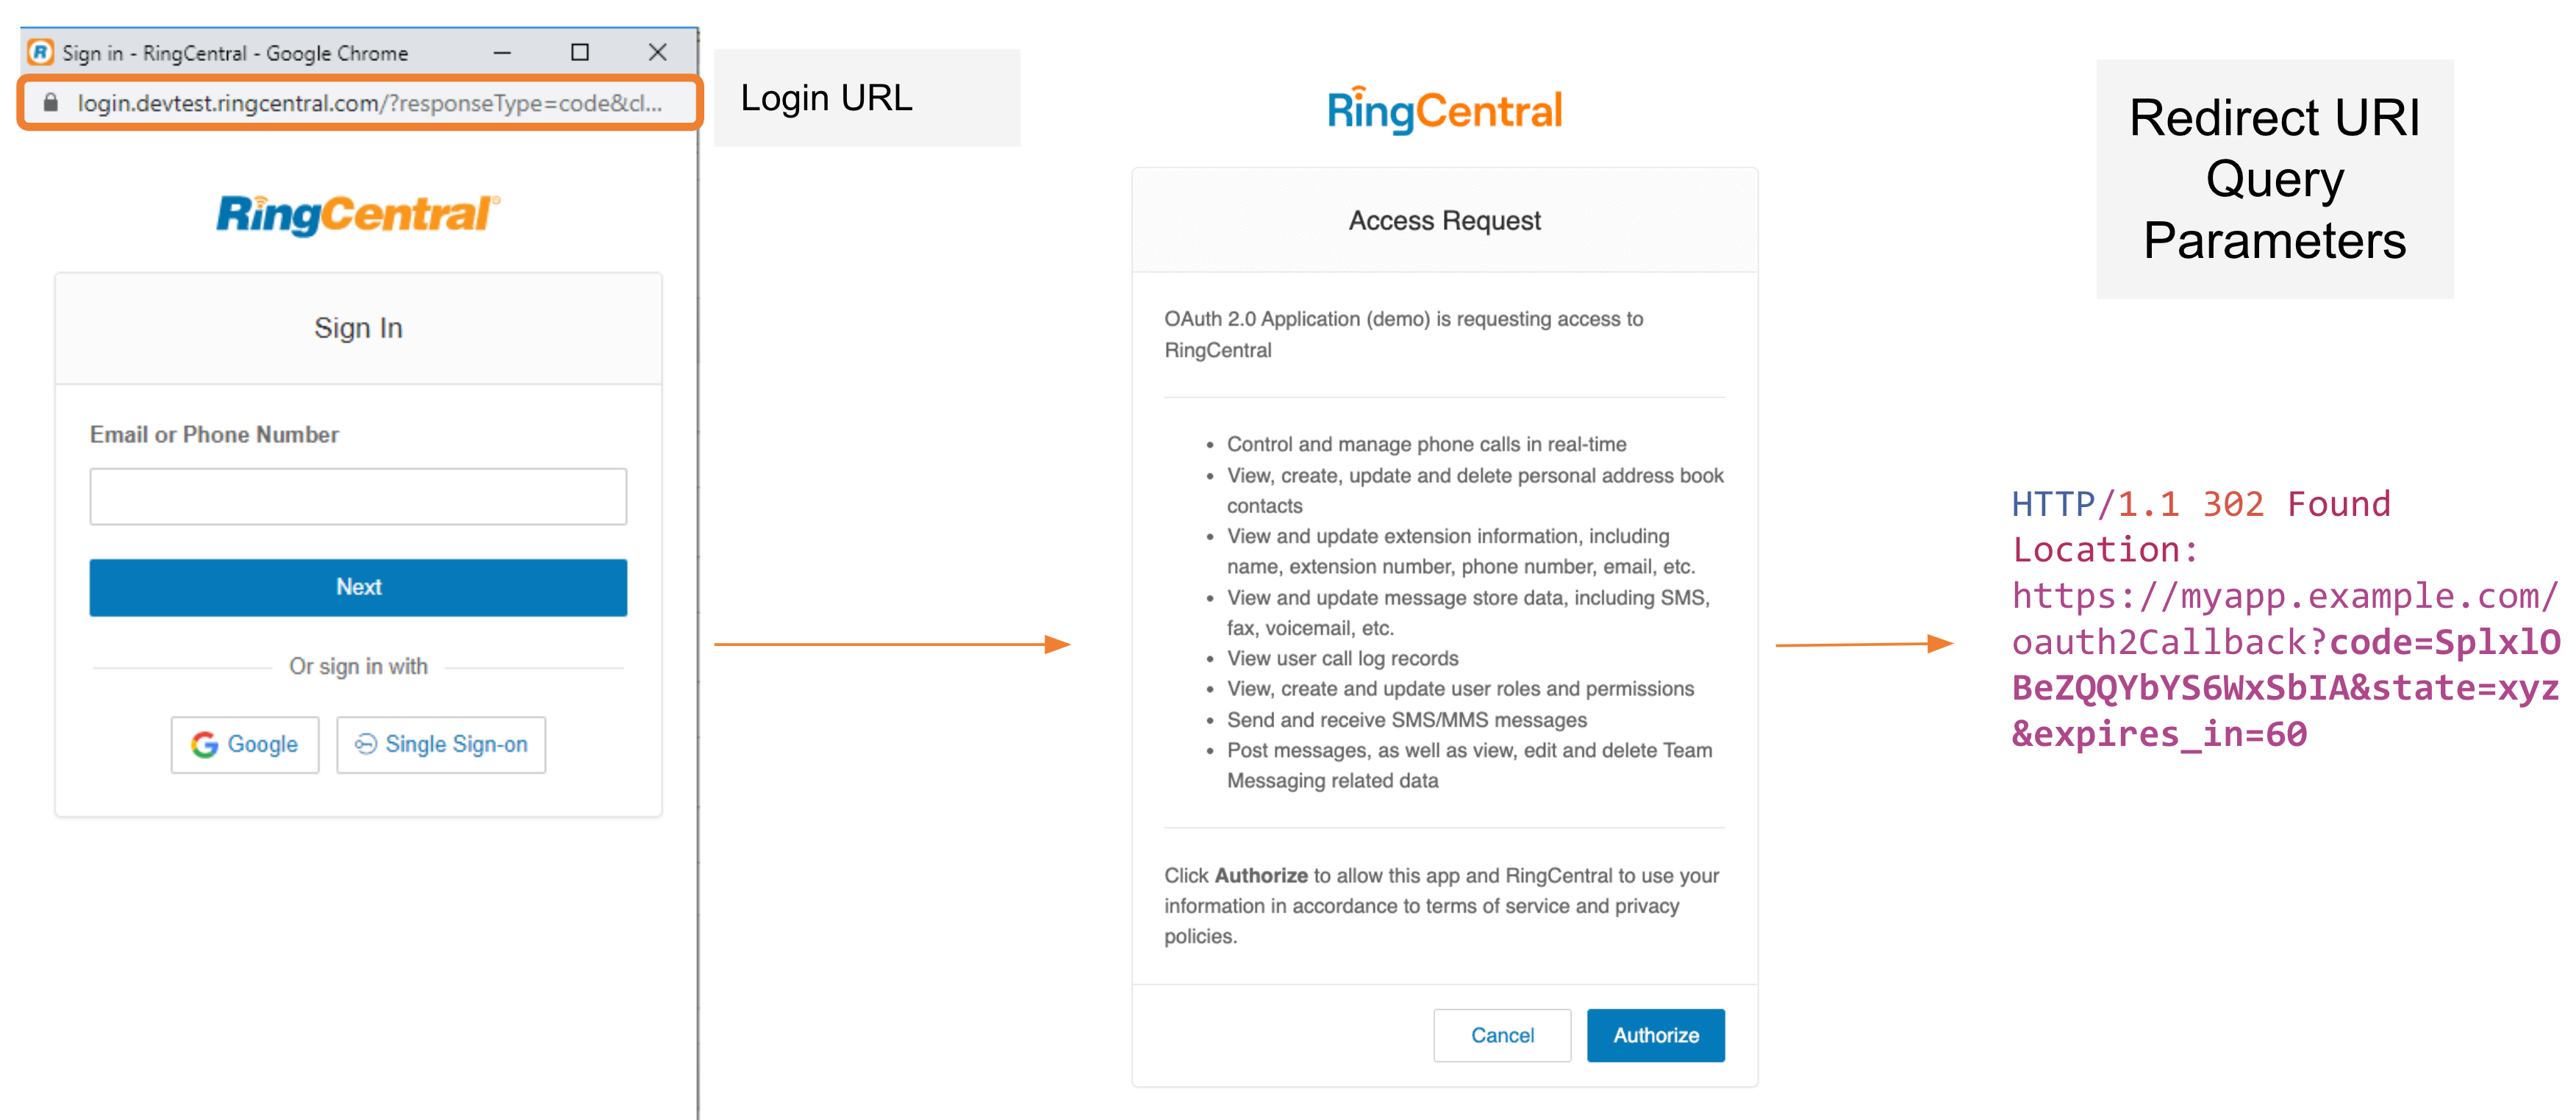 RingCentral Email Scam - Removal and recovery steps (updated)